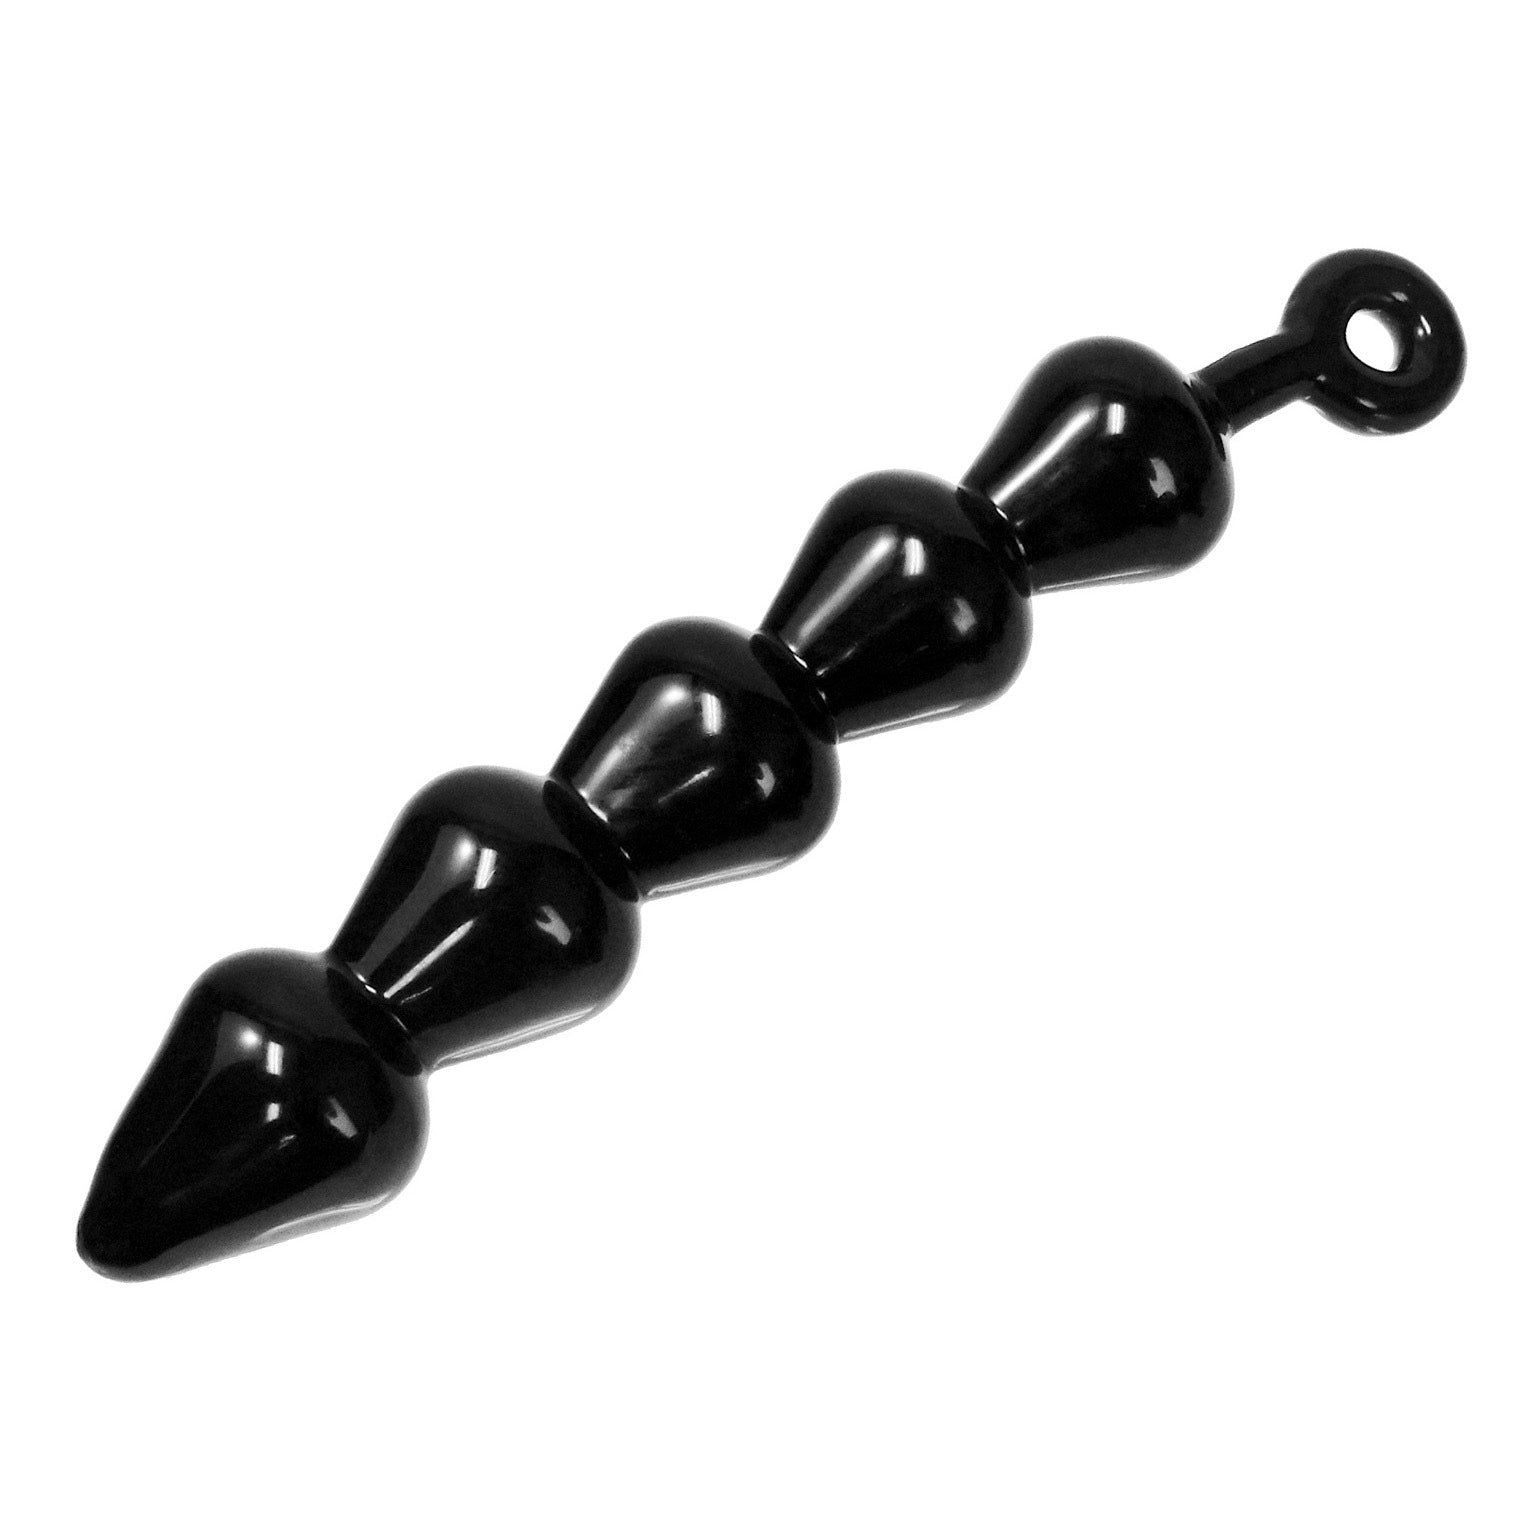 Anal Links - X-Large at CupidsSecretStash.com
If you are ready to graduate to a huge new toy, the Anal Links can be your next challenge and give your back door quite a workout! At Cupid’s Secret Stash 
Anal Toys
Master Series Cupid’s Secret Stash